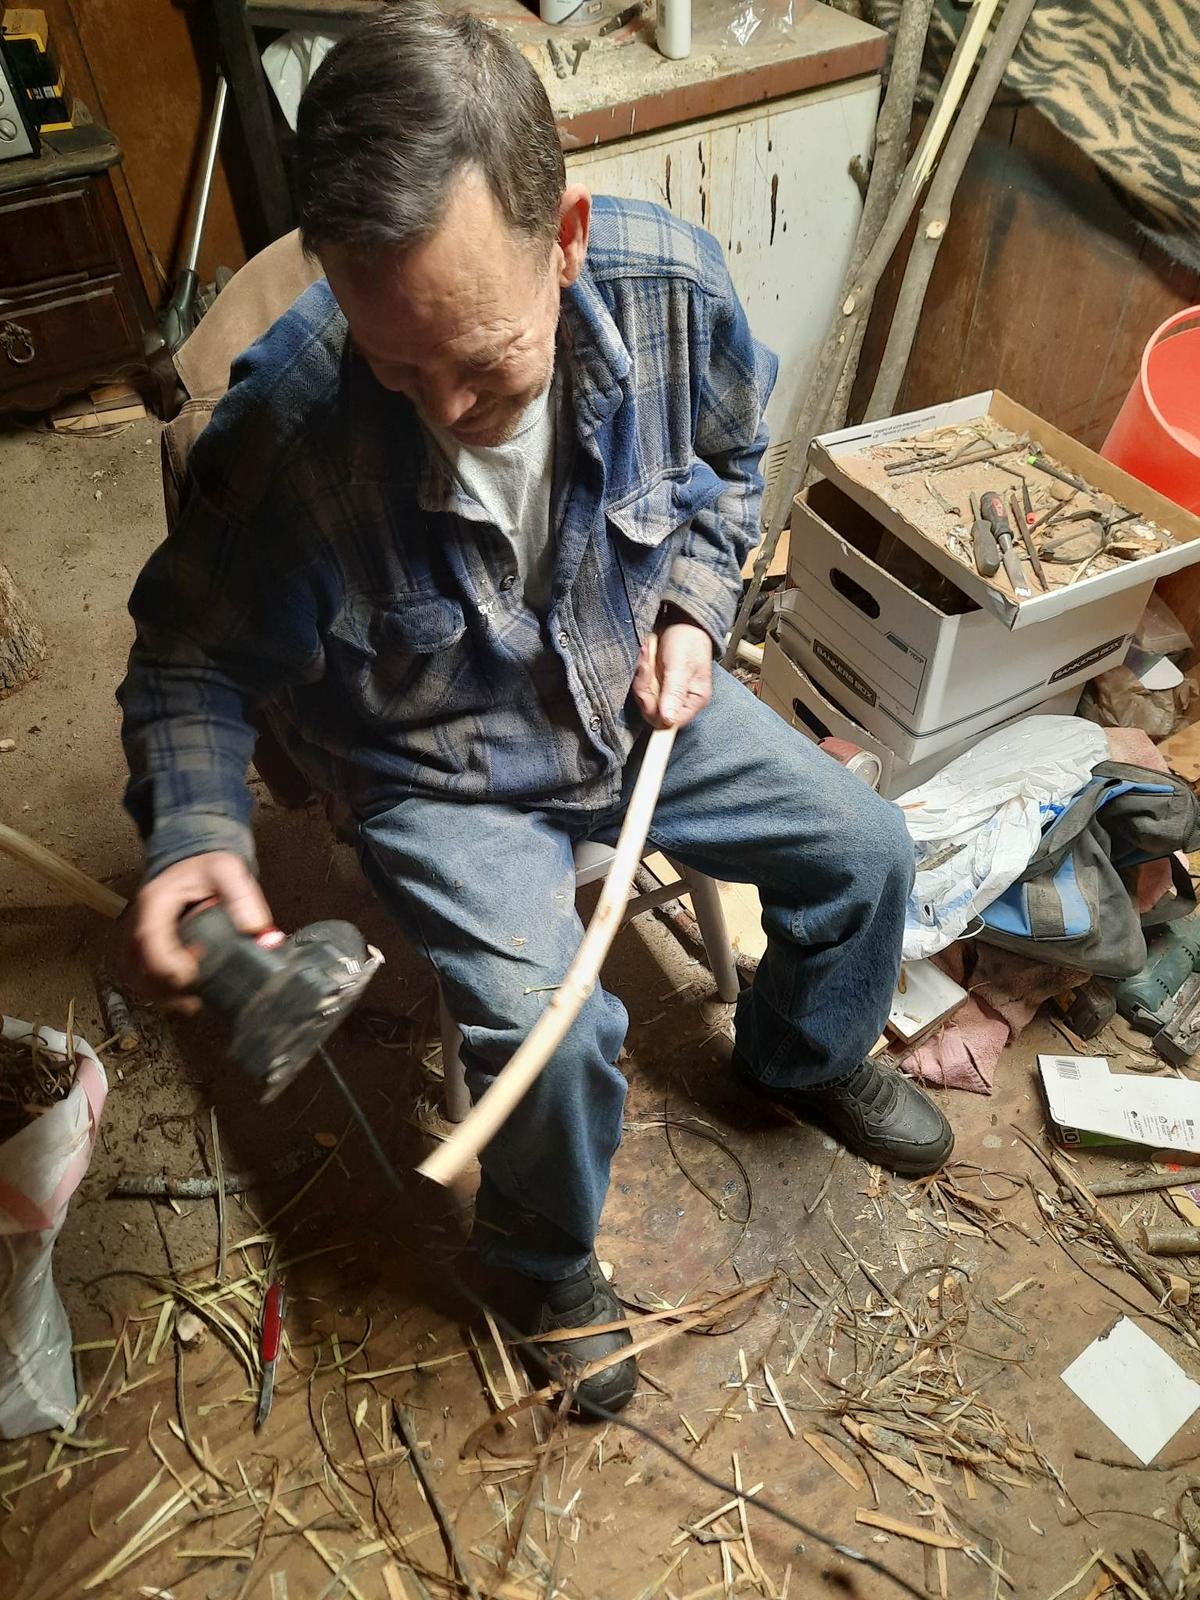 Dana Frazier, 60, loves crafting wooden canes, a hobby that has kept him sober. (Courtesy of Trevor Michaud)